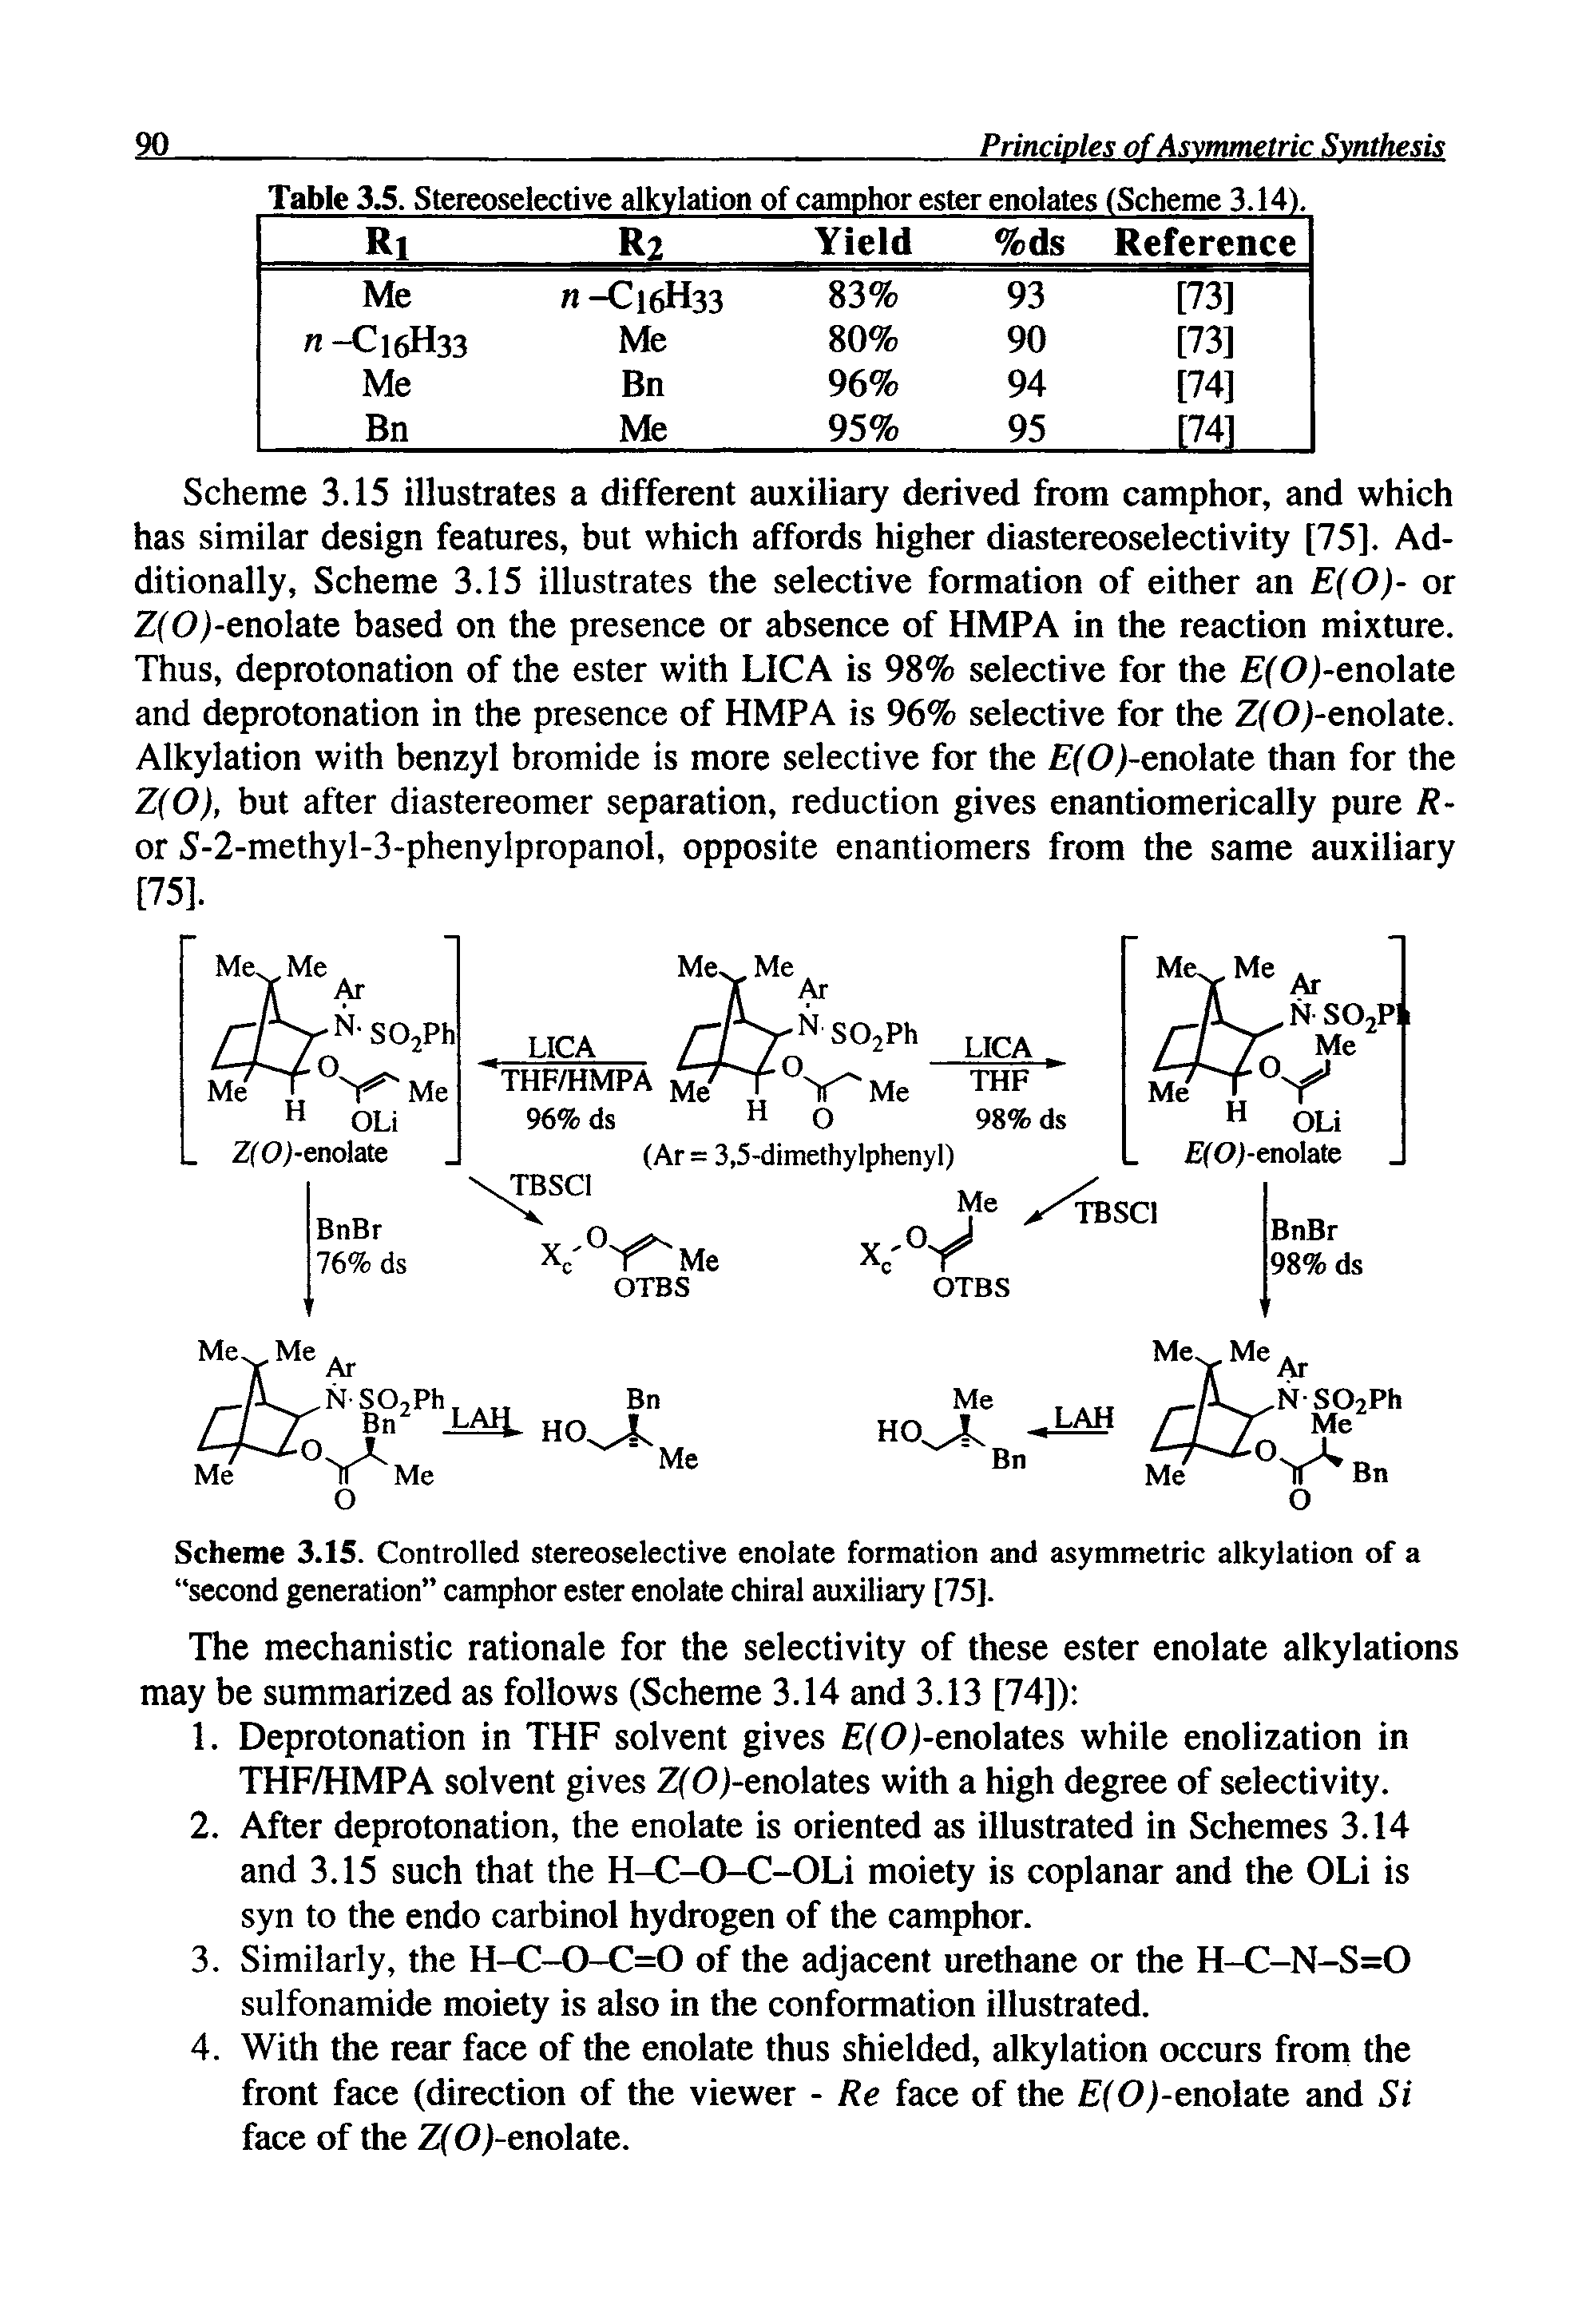 Scheme 3.15. Controlled stereoselective enolate formation and asymmetric alkylation of a second generation camphor ester enolate chiral auxiliary [75].